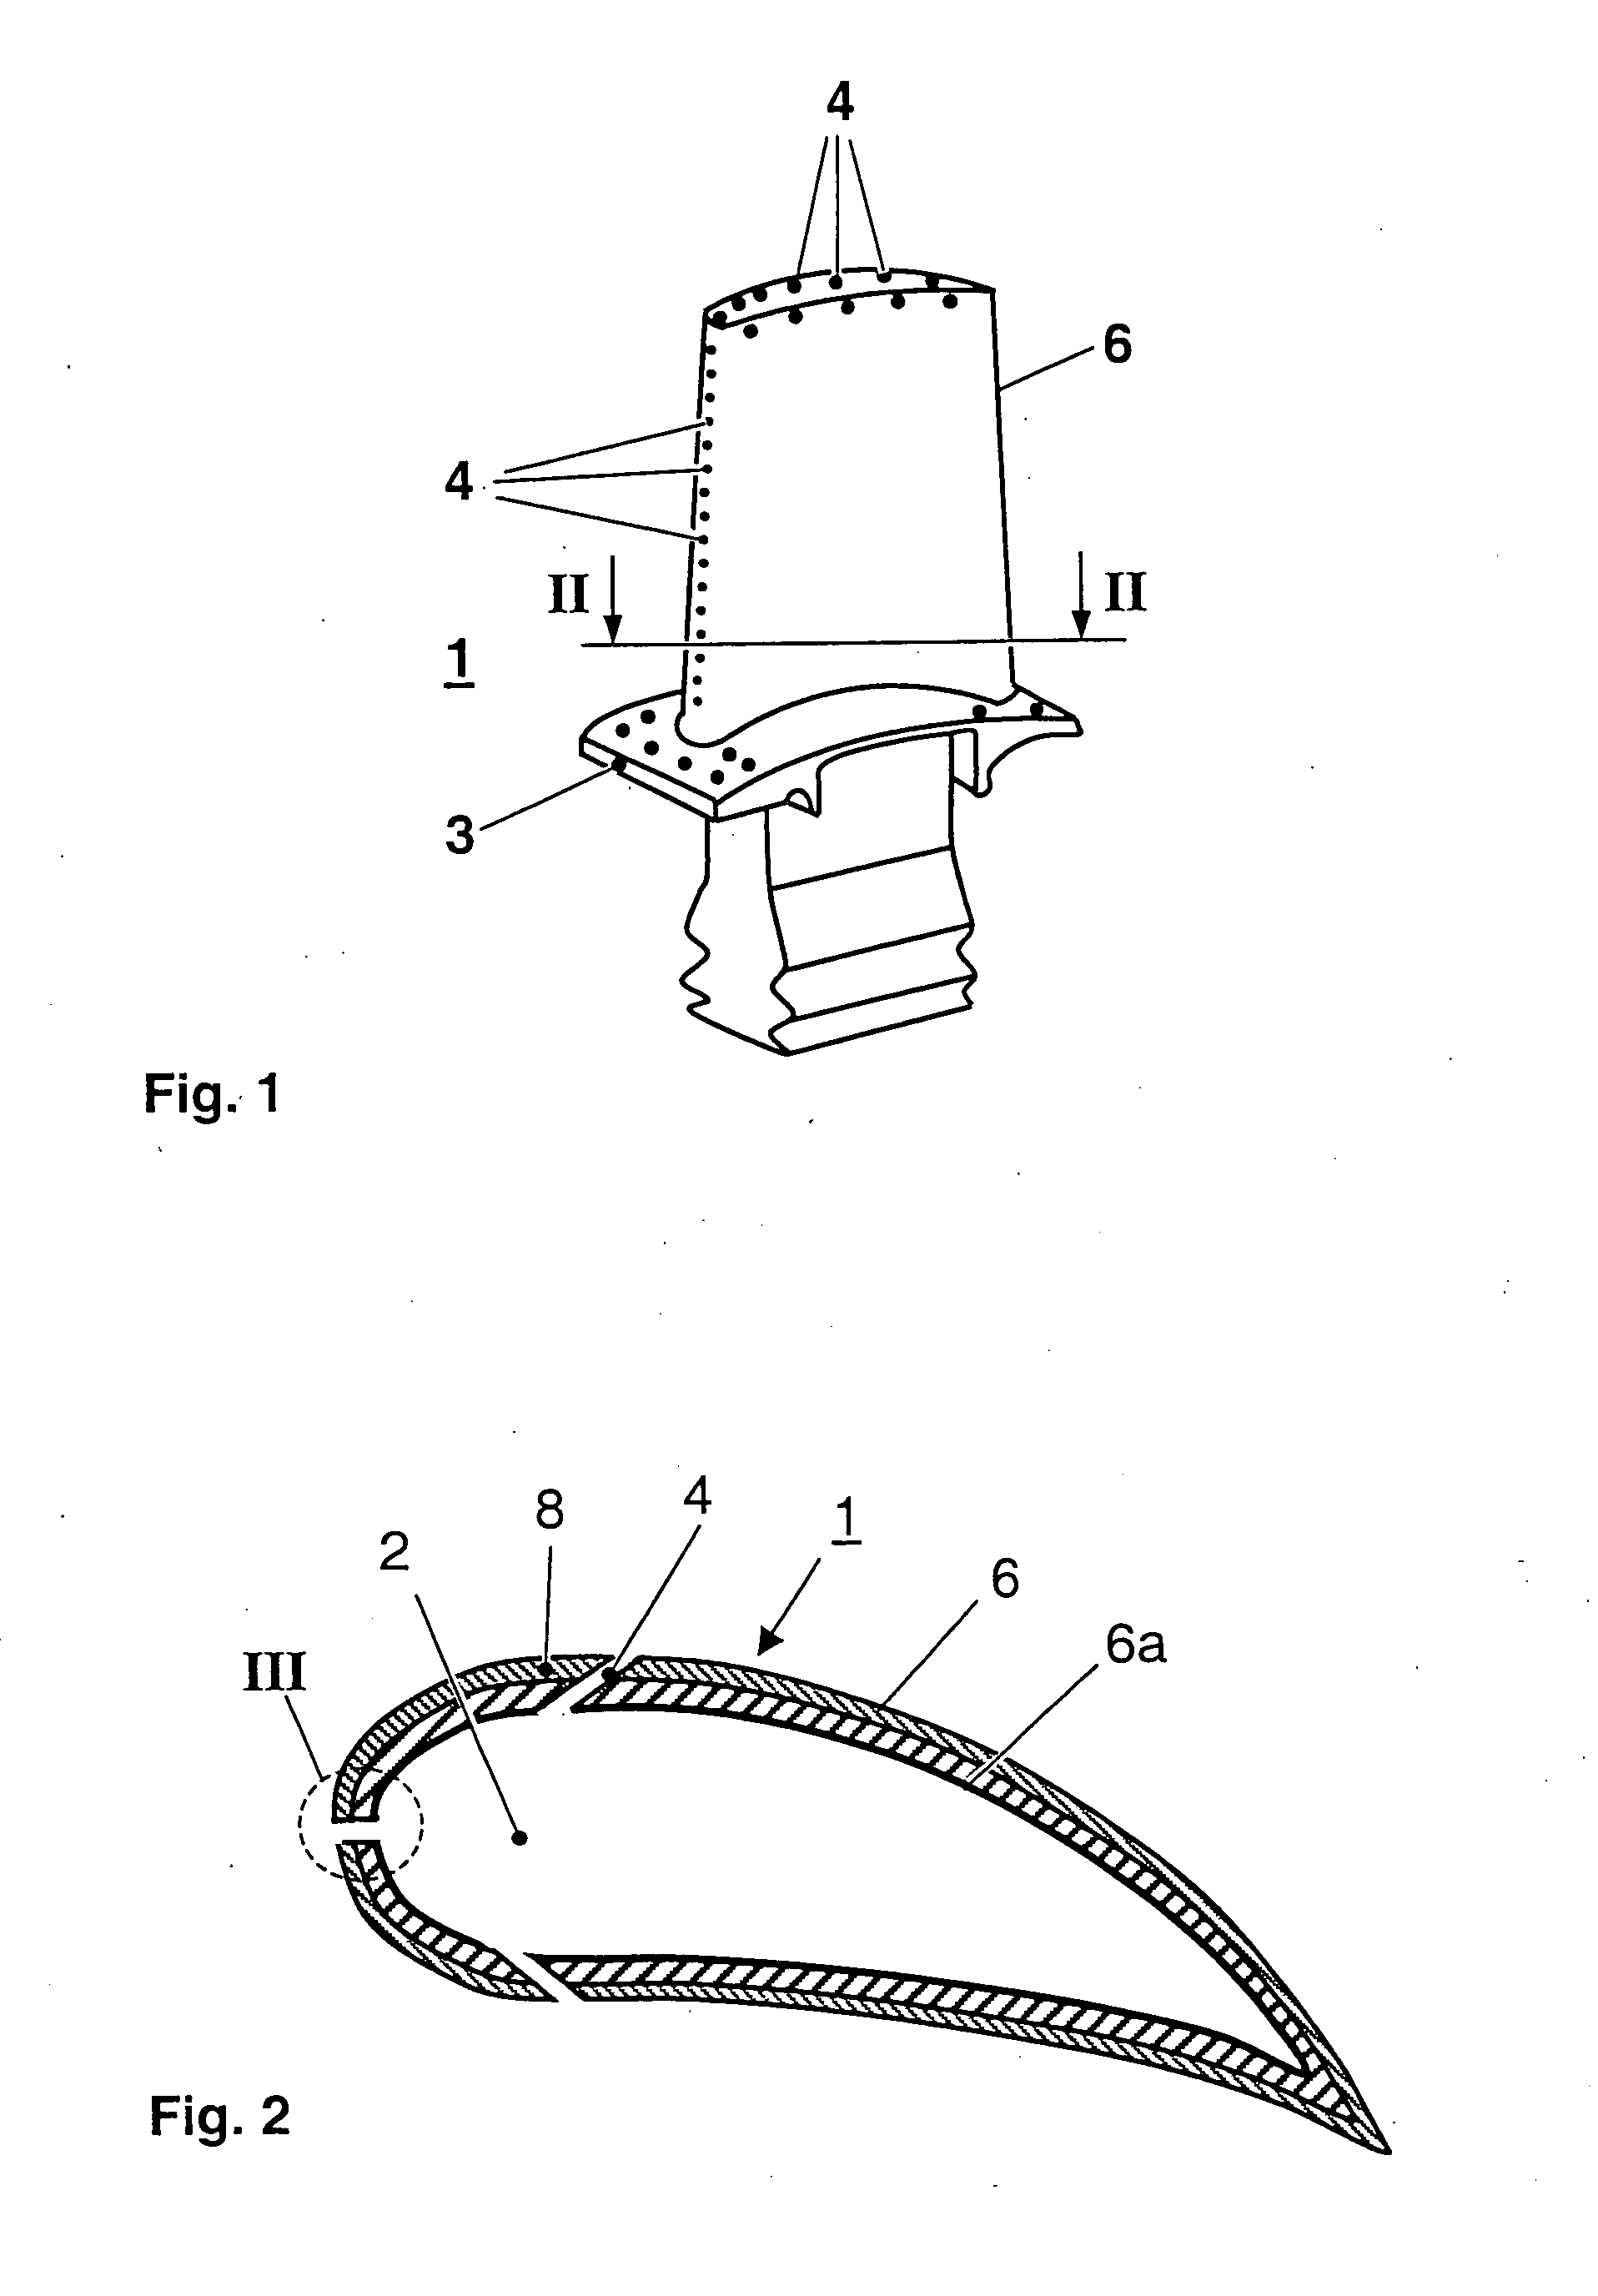 Method of protecting a local area of a component